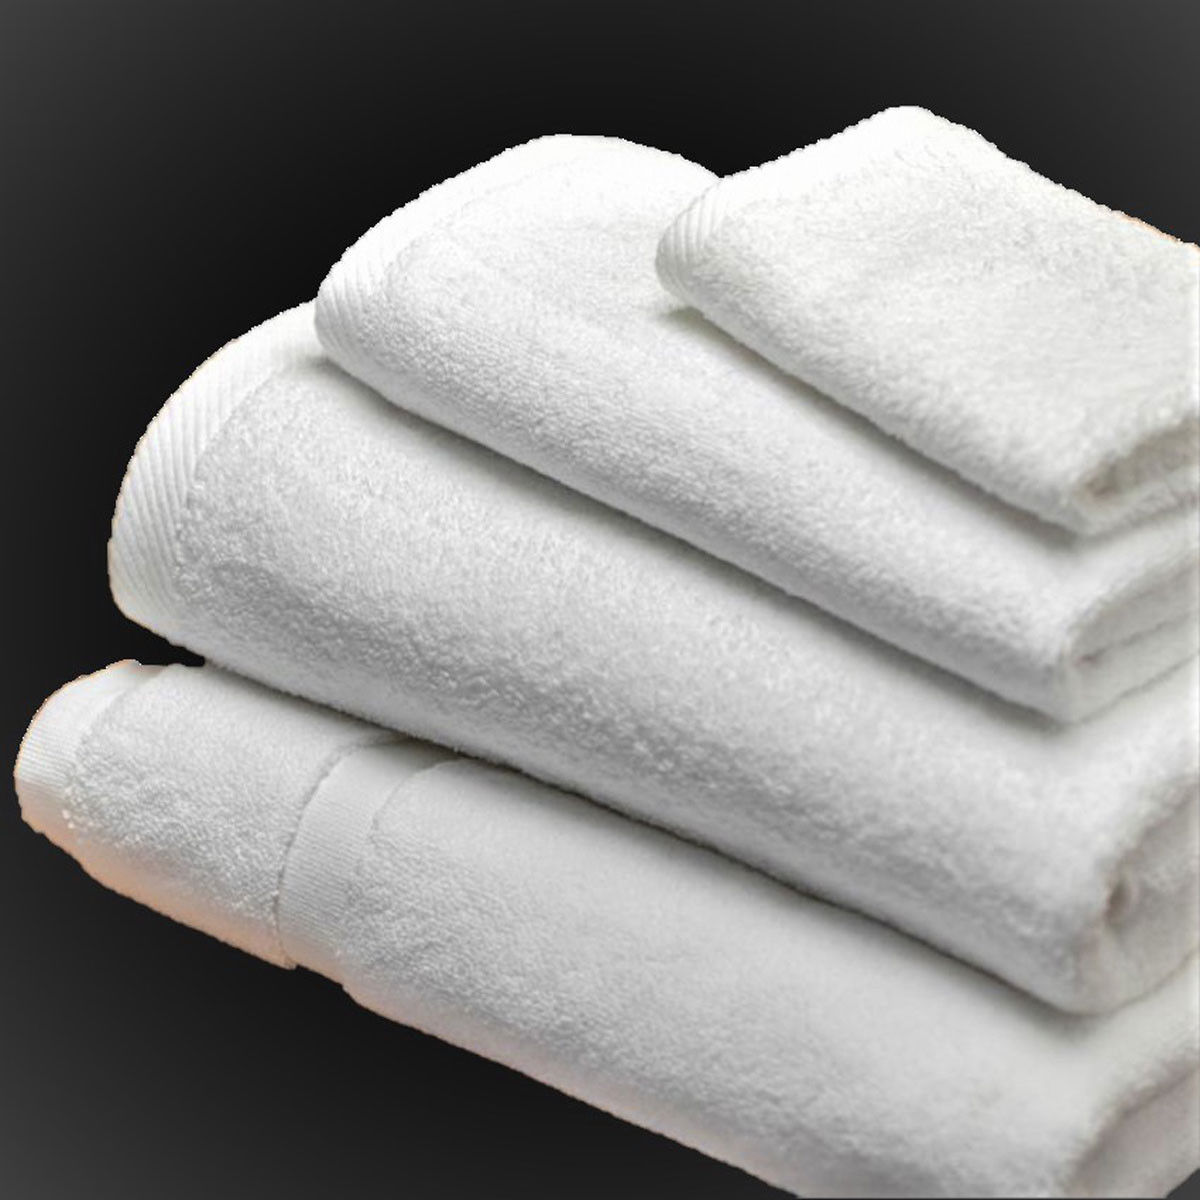 How is the bulk bath towels wholesale packaged for purchase?